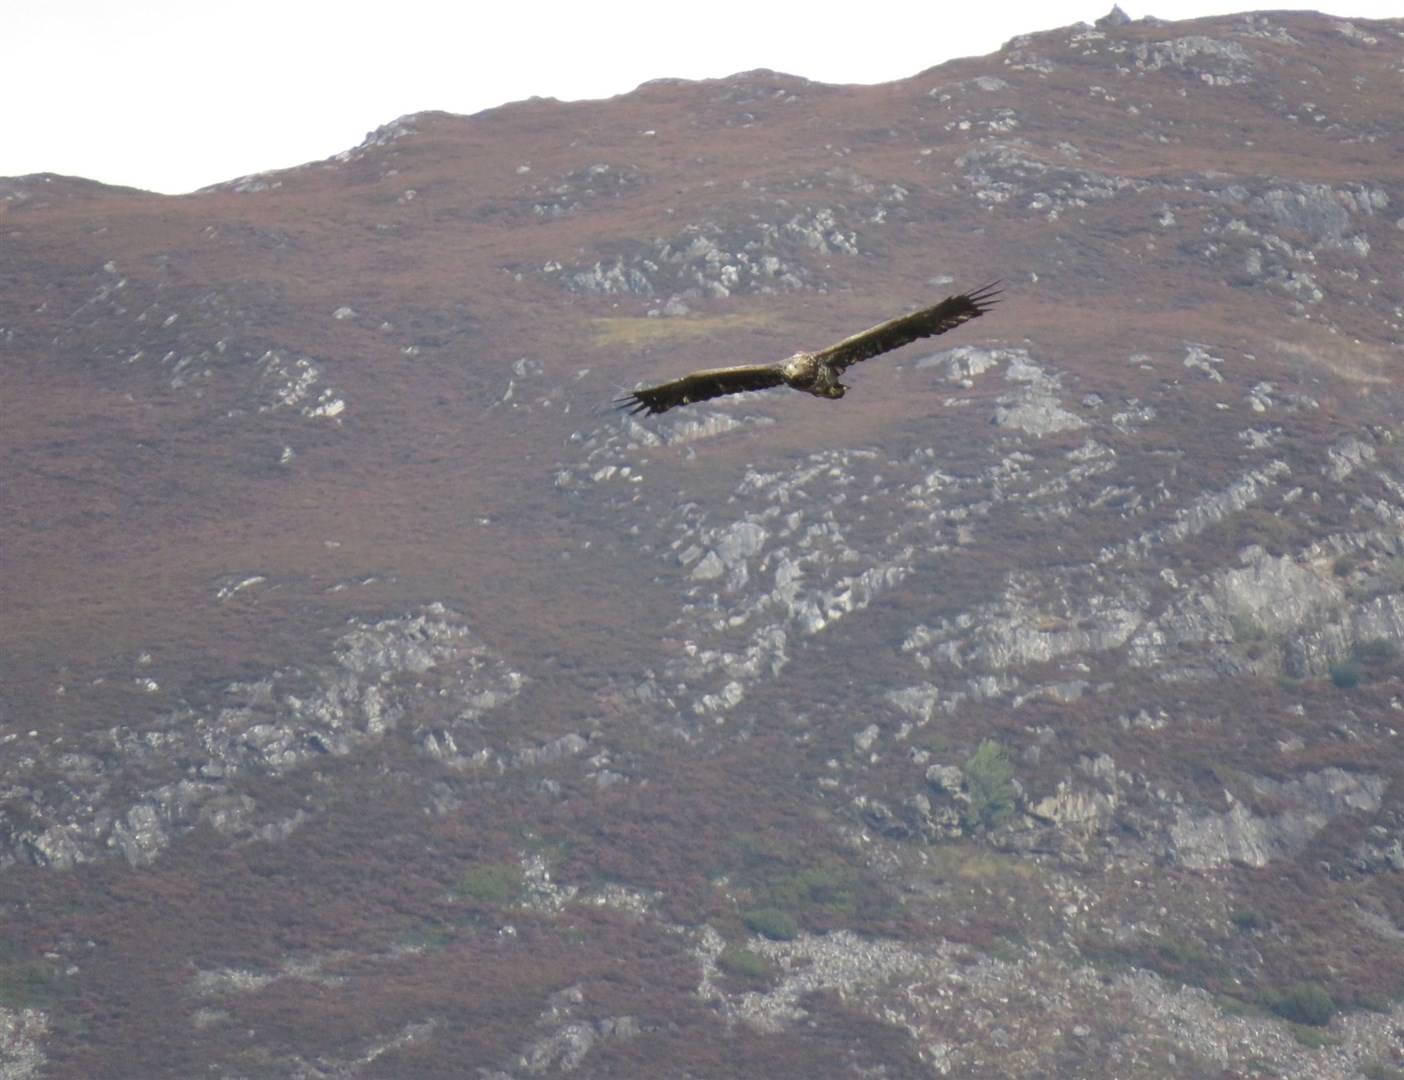 Sea eagle over Badenoch photographed by field worker Dave Pierce